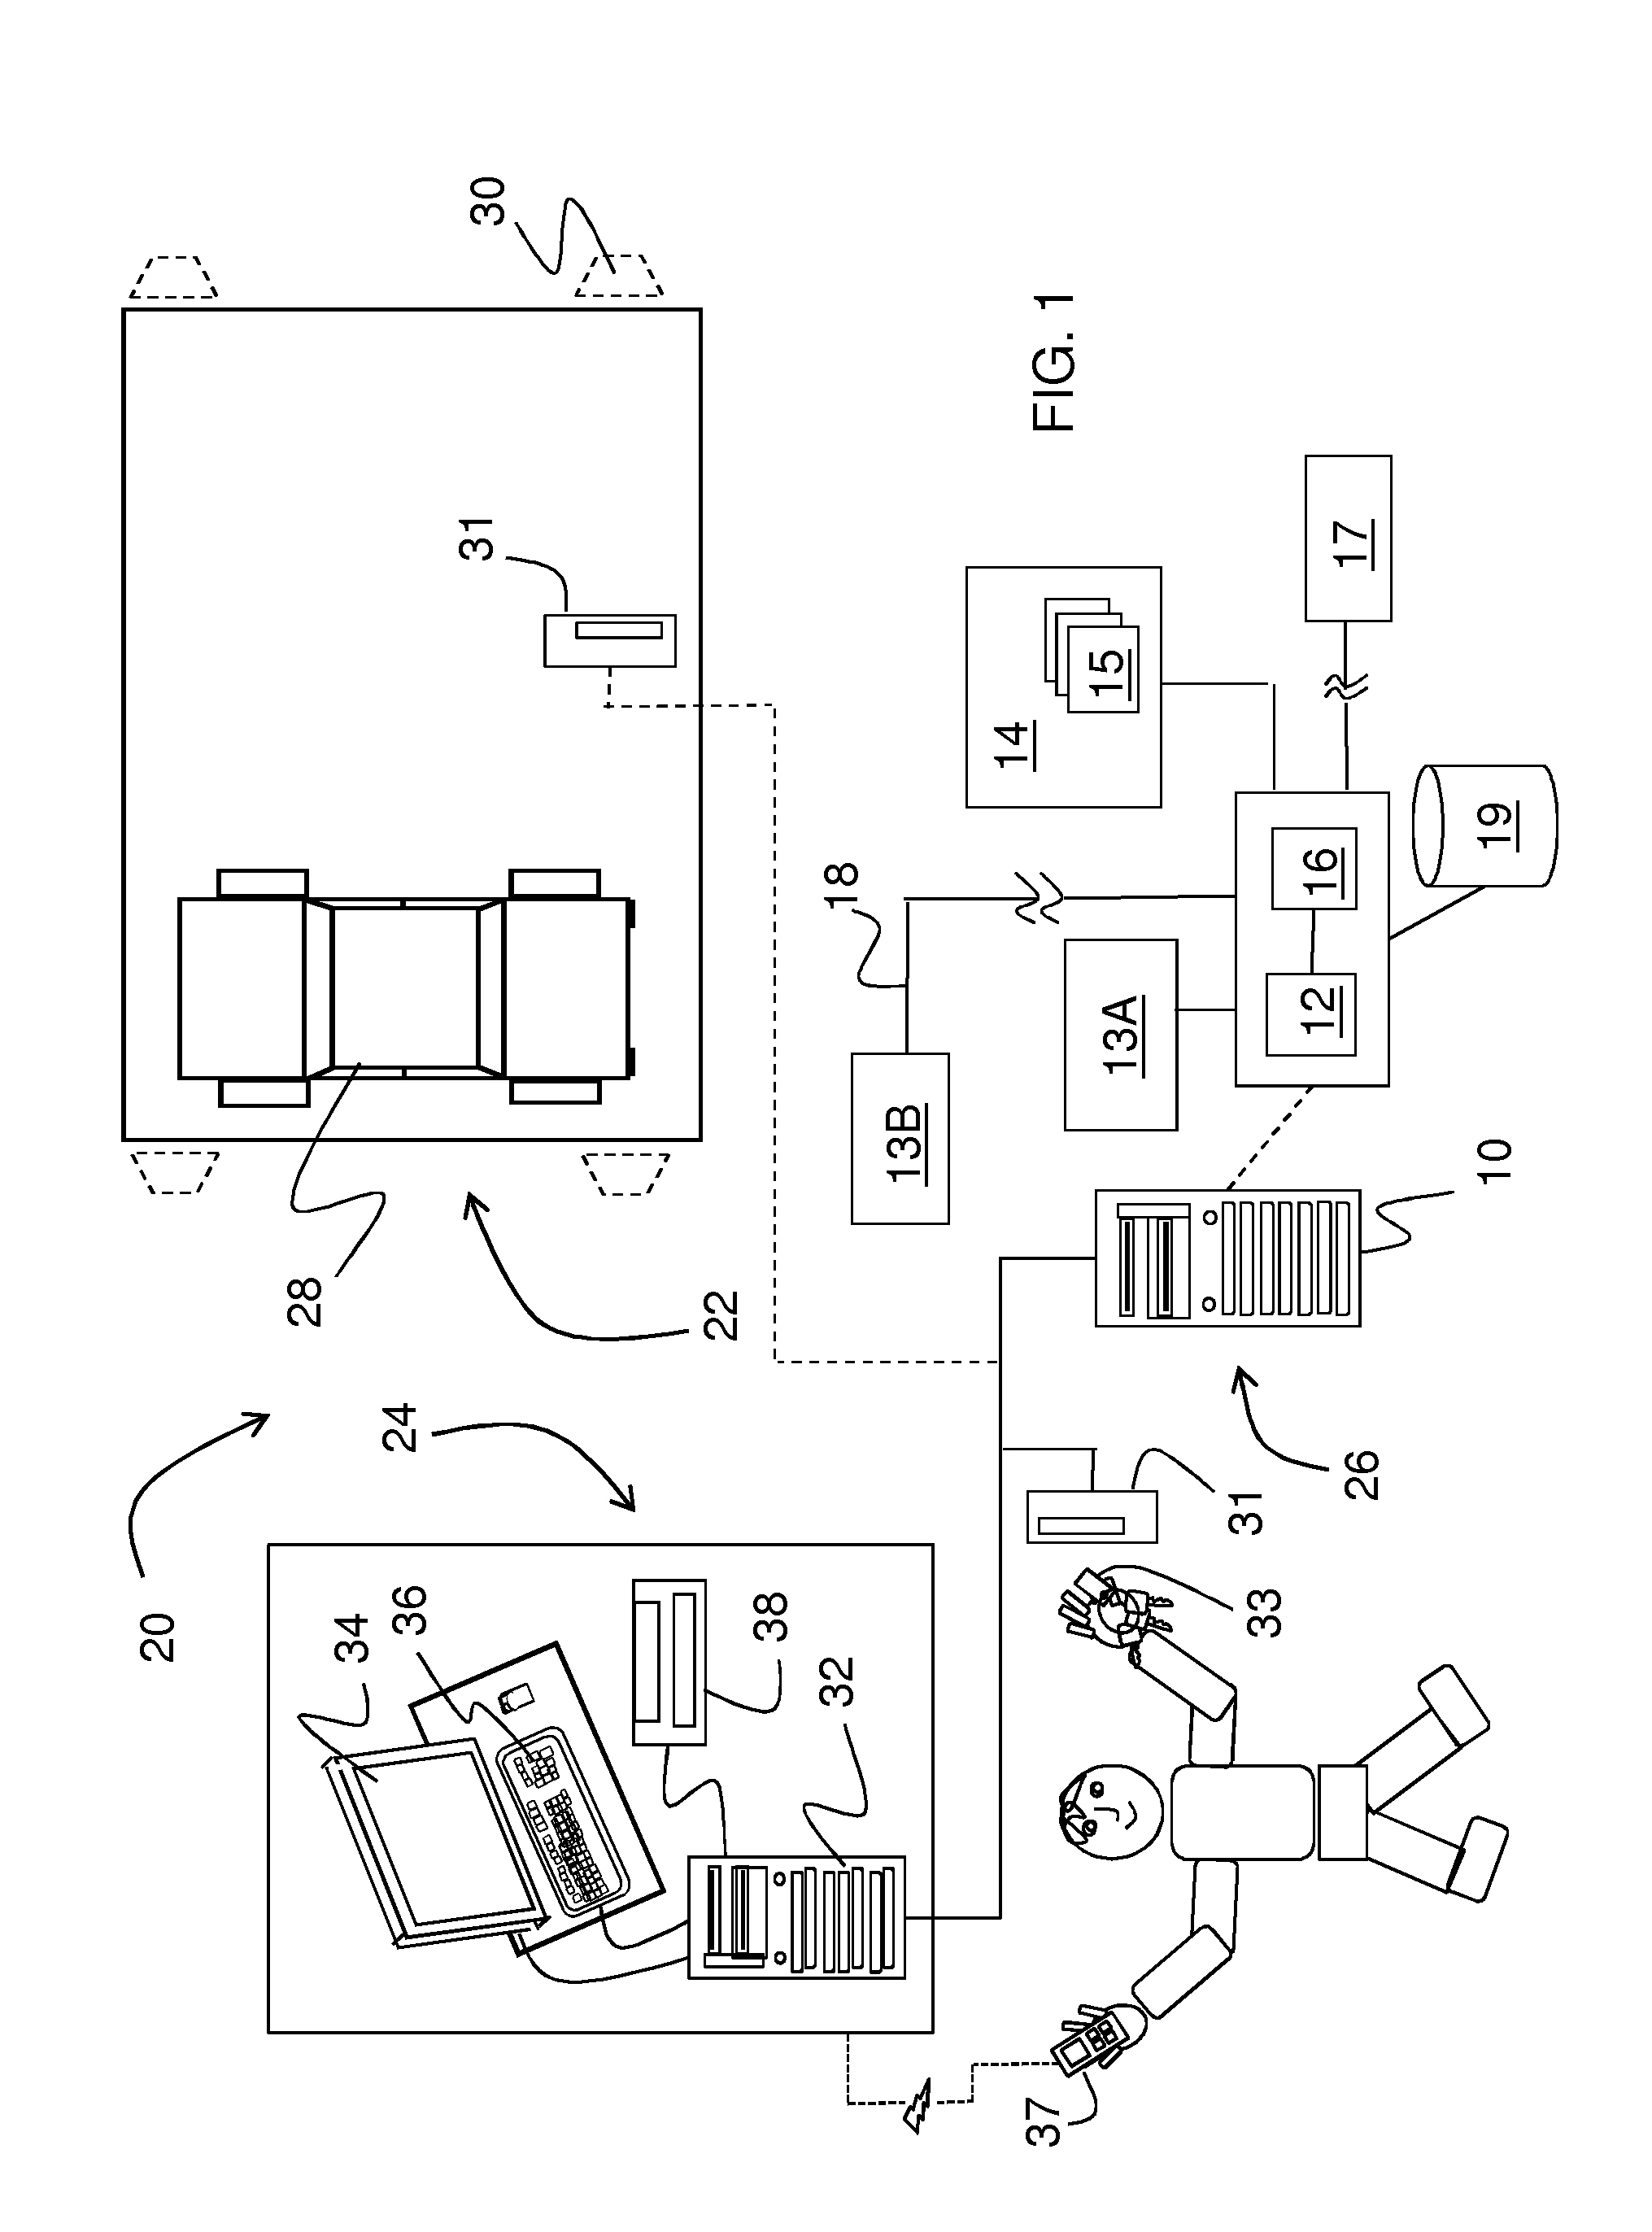 Automated drop-off assistance system and method